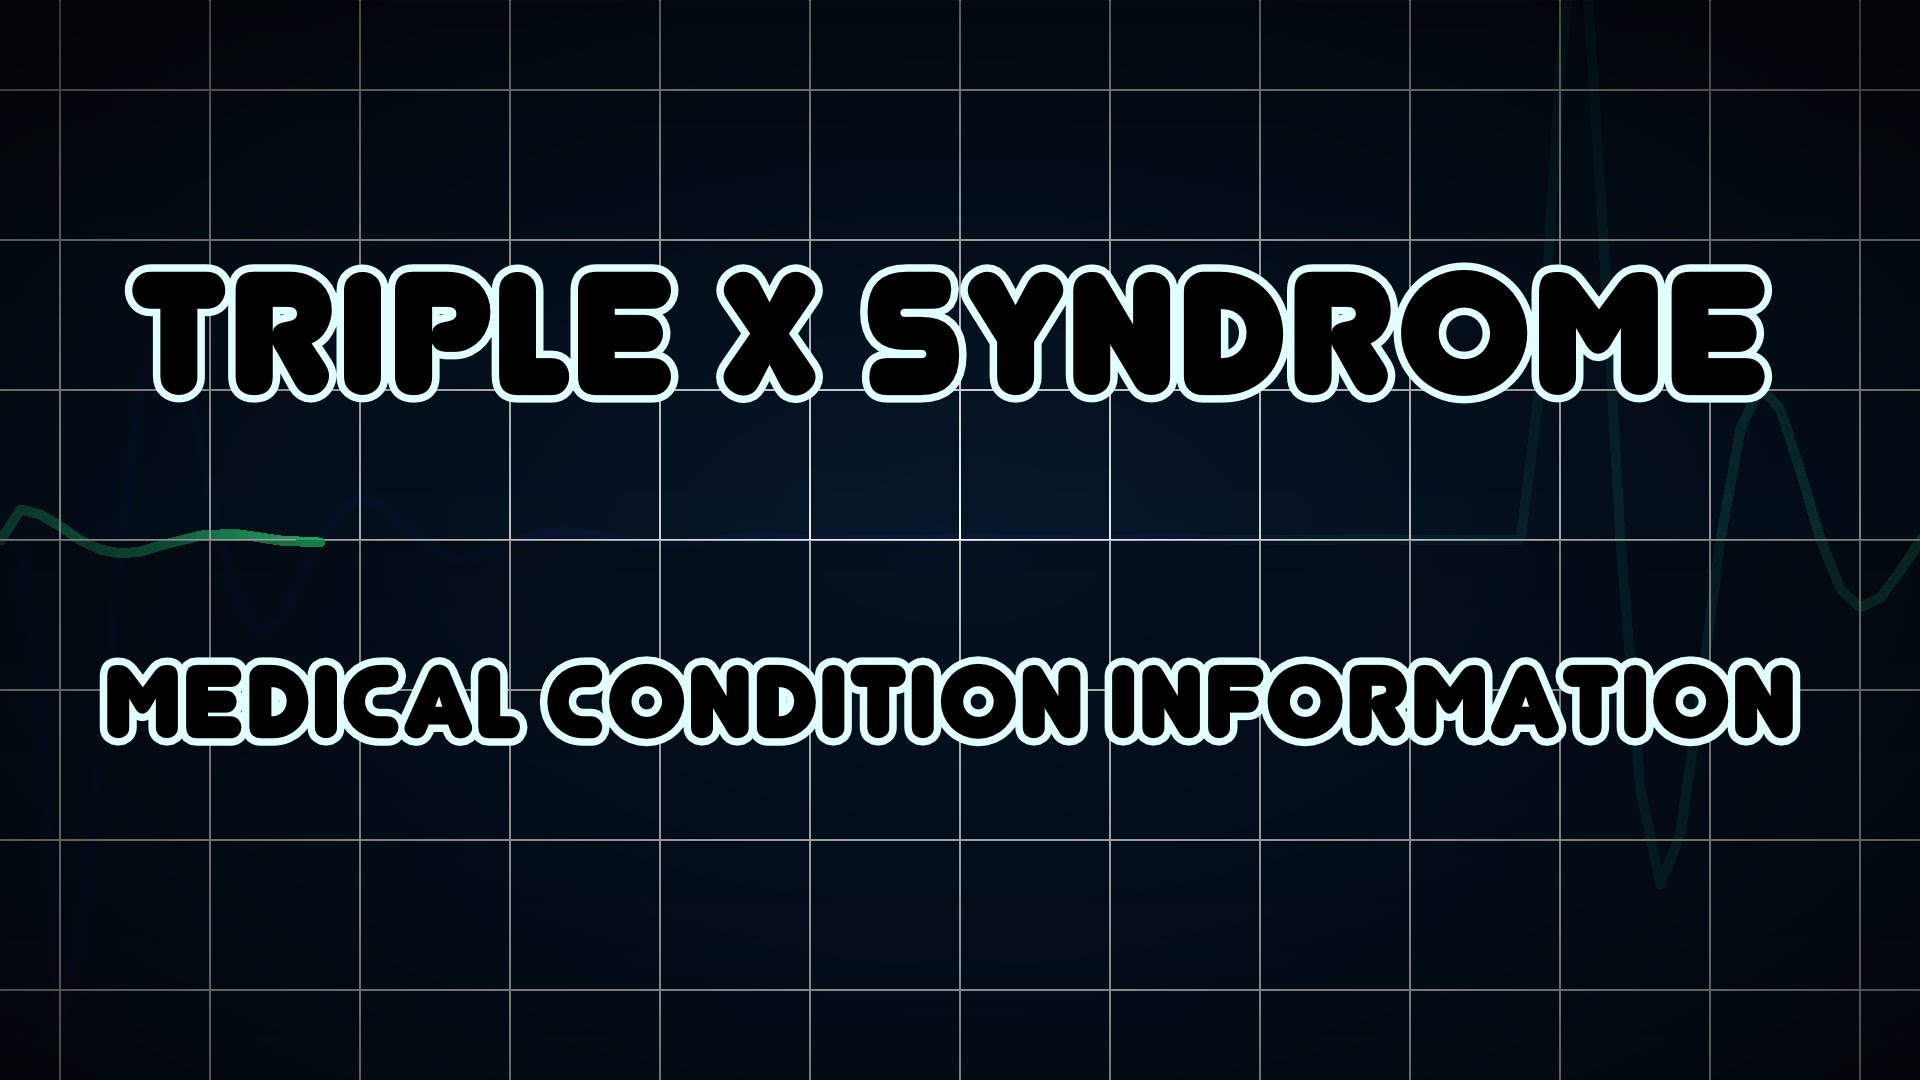 Triple X syndrome (Medical Condition) - YouTube